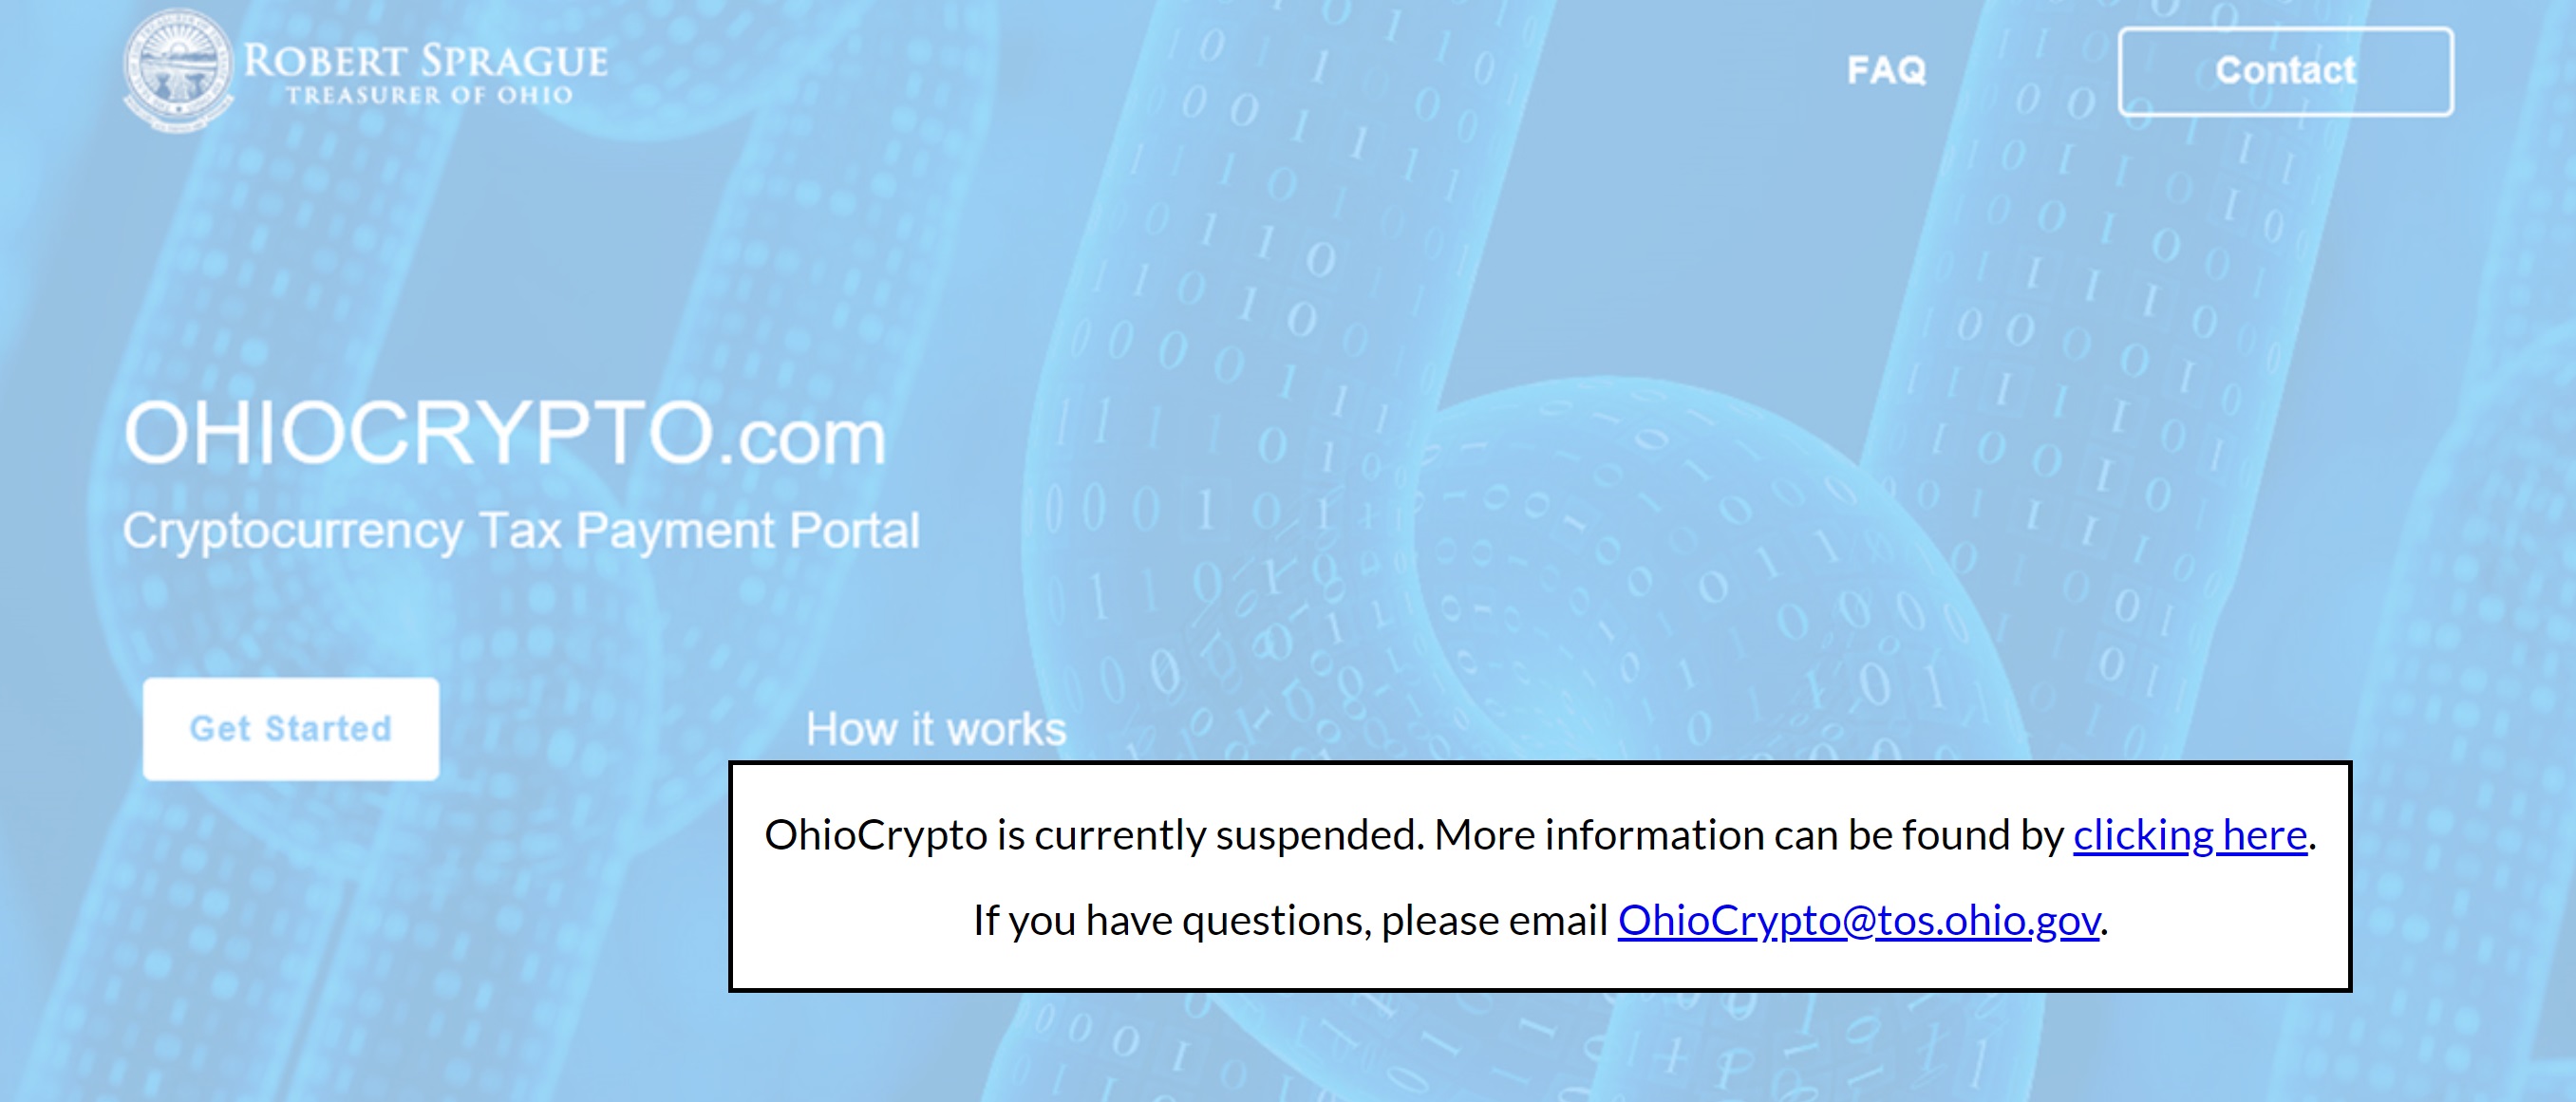 Ohio Crypto Program Hits a Snag, Attorney General Finds It Illegal